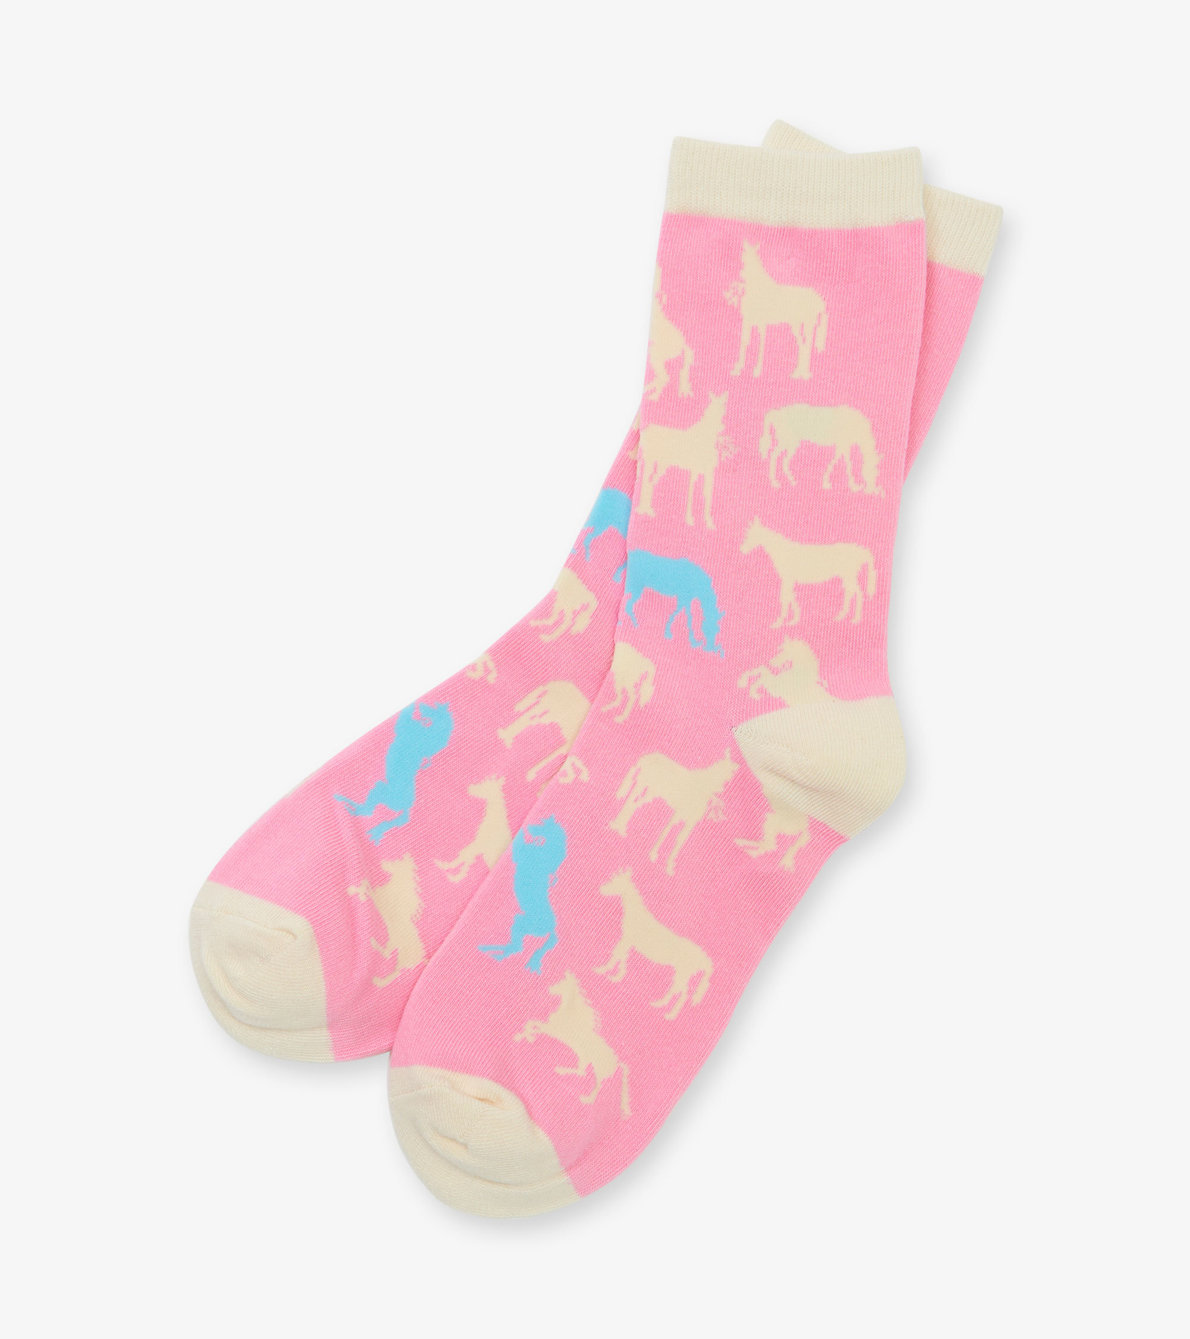 View larger image of Horse Silhouettes Women's Crew Socks